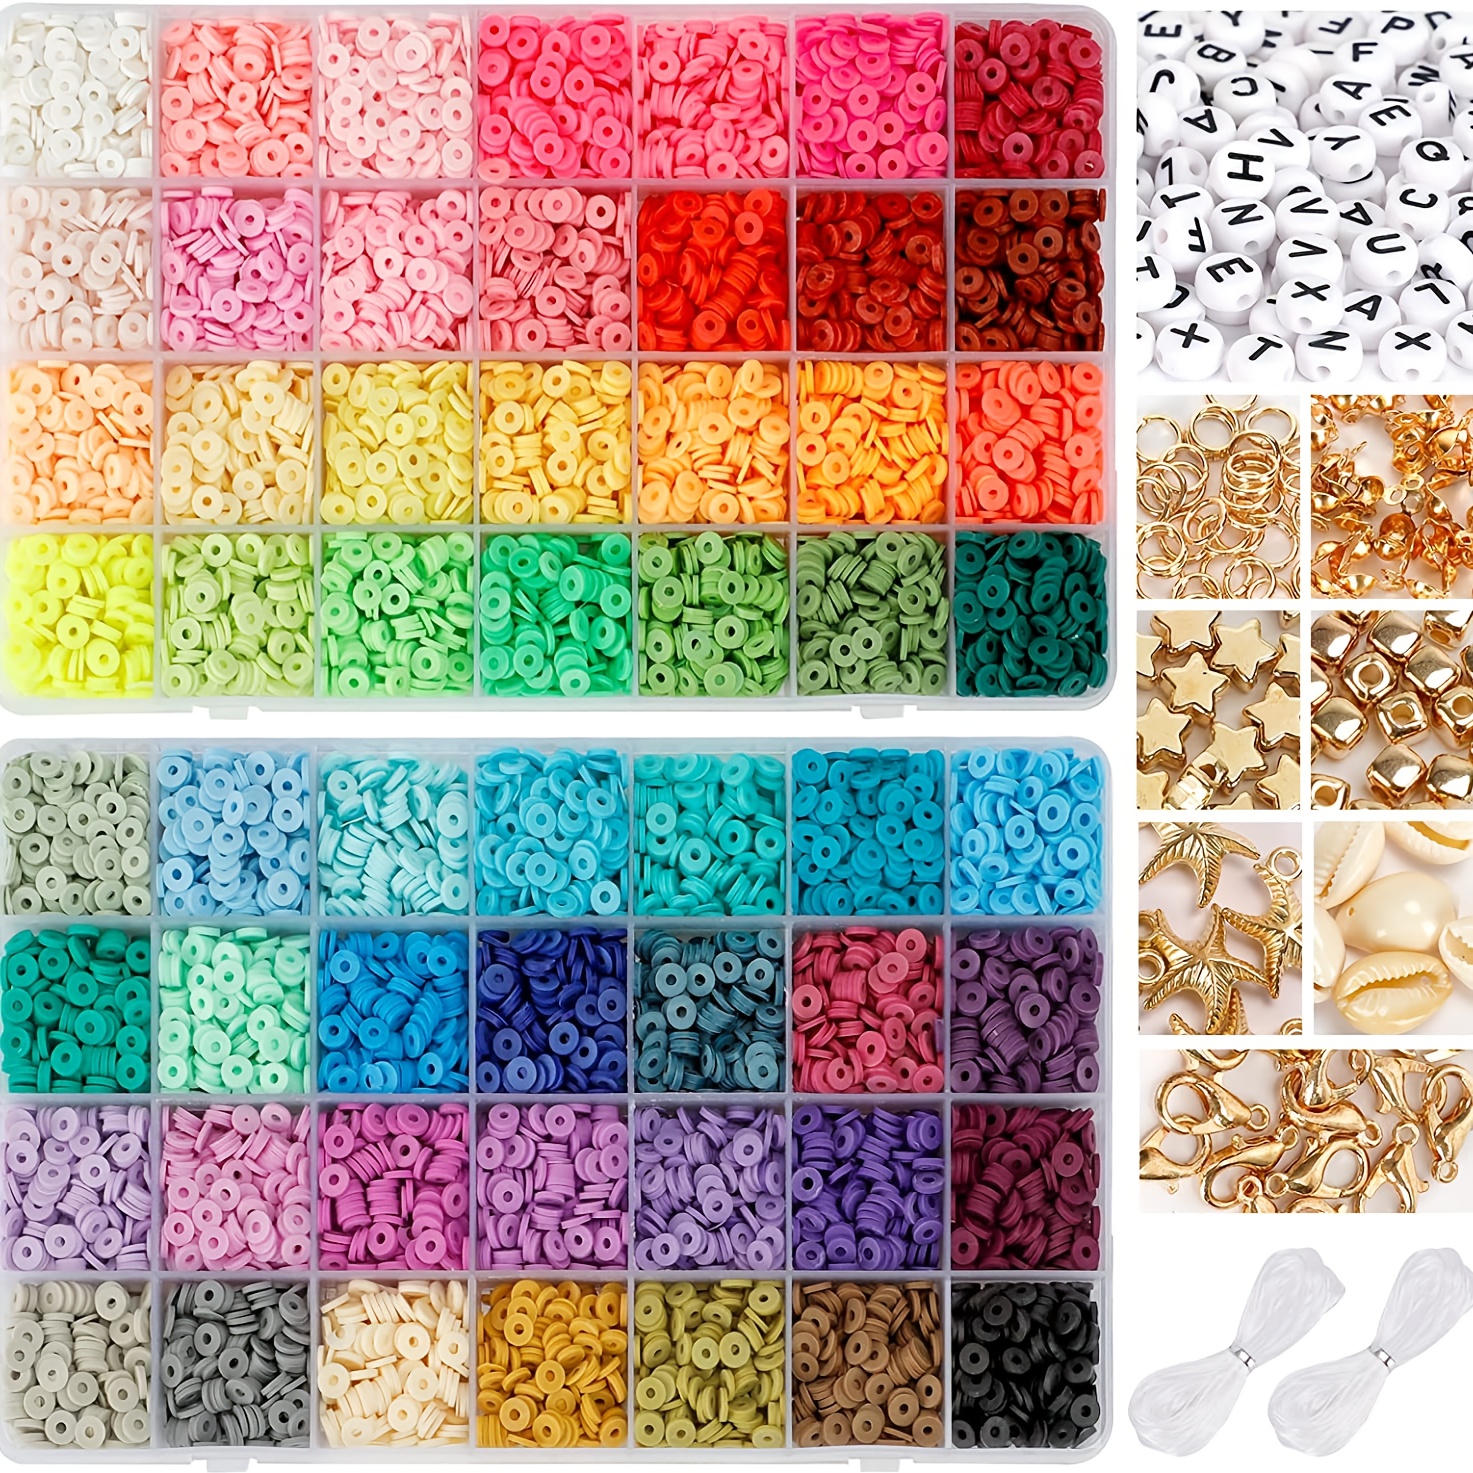  7600Pcs Clay Beads Kit for Bracelet Making, 24 Colors 6mm Flat  Round Polymer Clay Beads Spacer Heishi Beads with Alphabet Letter Beads  Pendant Charms for Jewelry Making : Arts, Crafts 